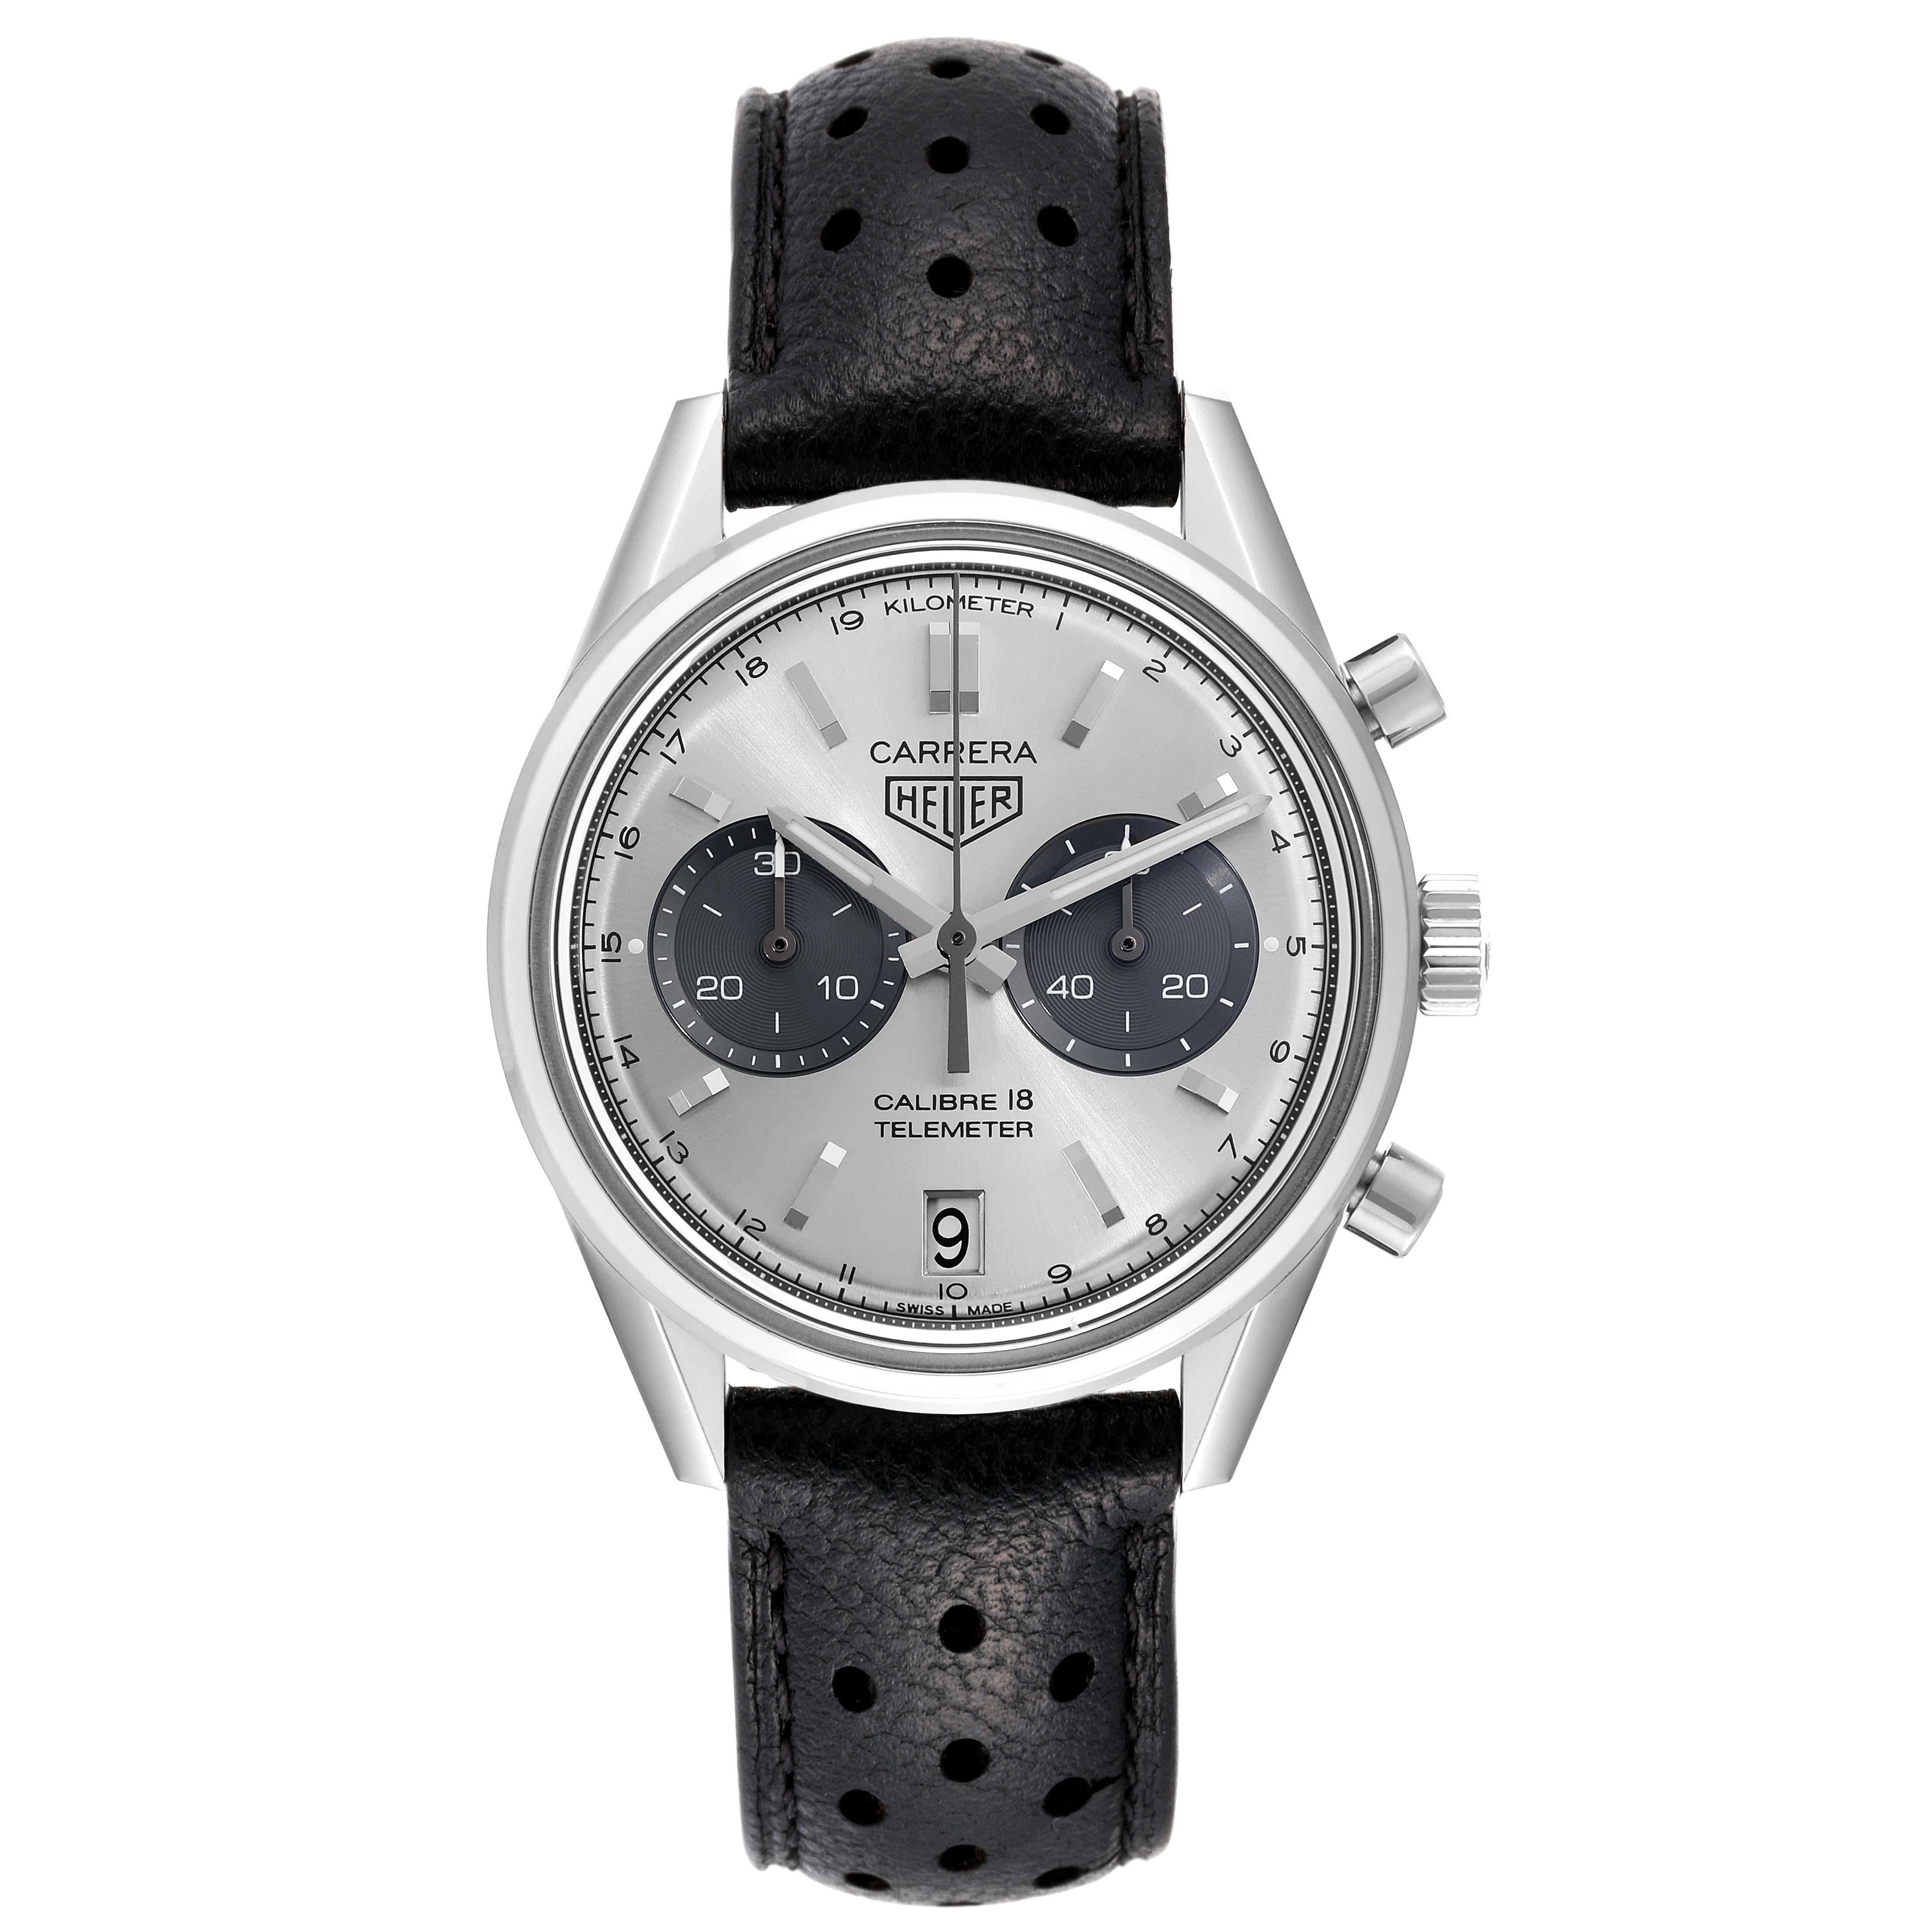 Tag Heuer Carrera Calibre 18 Telemeter Steel Mens Watch CAR221A Box Card. Automatic self-winding chronograph movement. Stainless steel case 39 mm in diameter. Stainless steel bezel. Scratch resistant sapphire crystal. Silver dial with raised baton